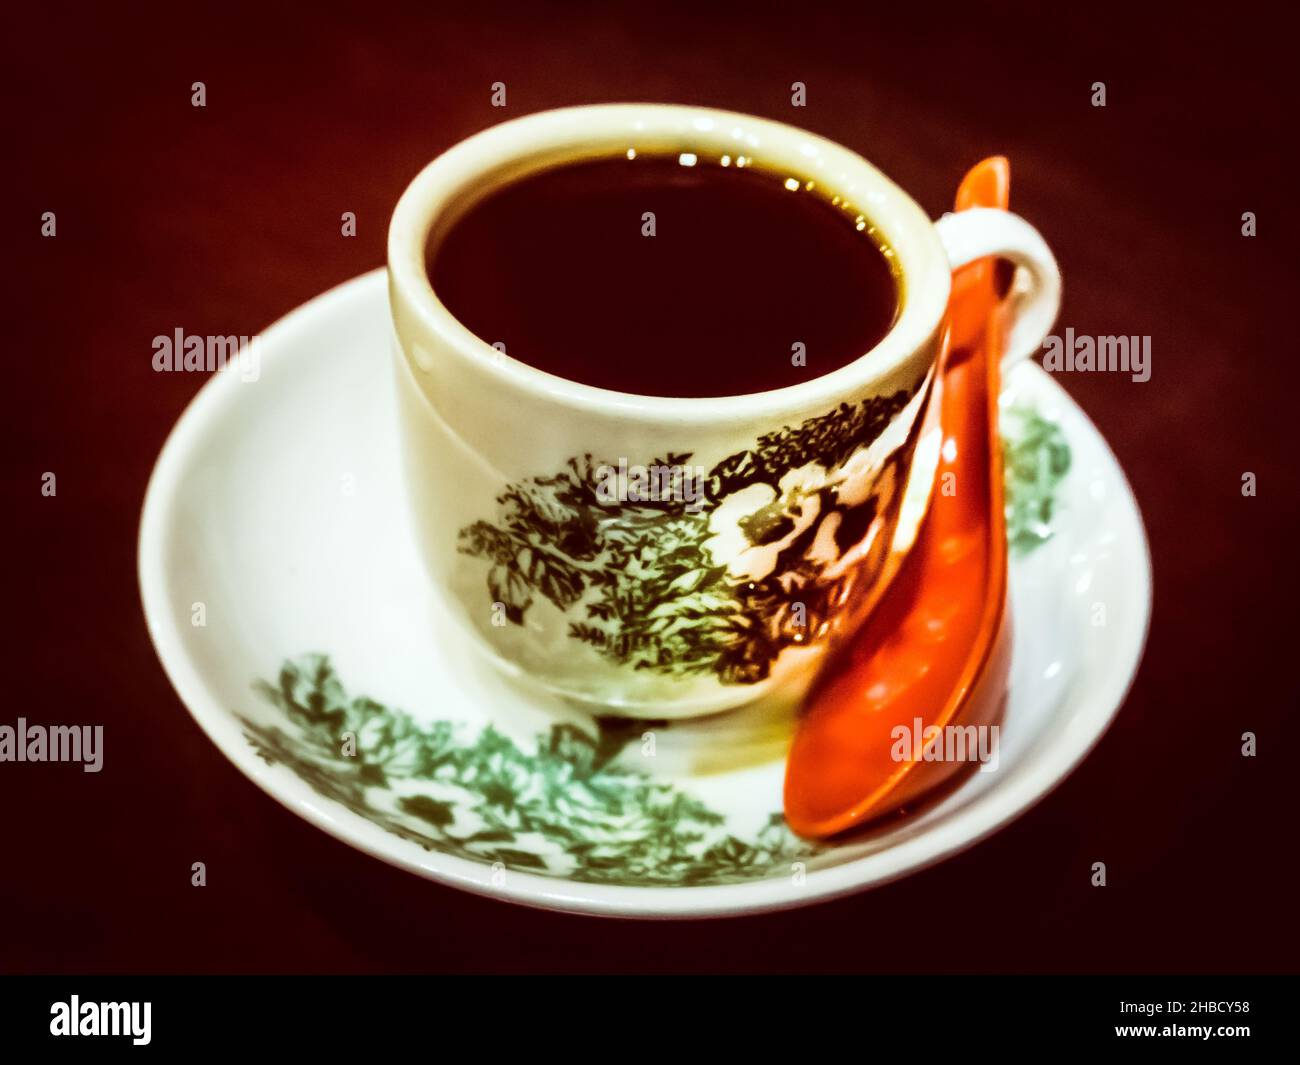 Traditional black coffee in Singapore Coffee Shop. Stock Photo